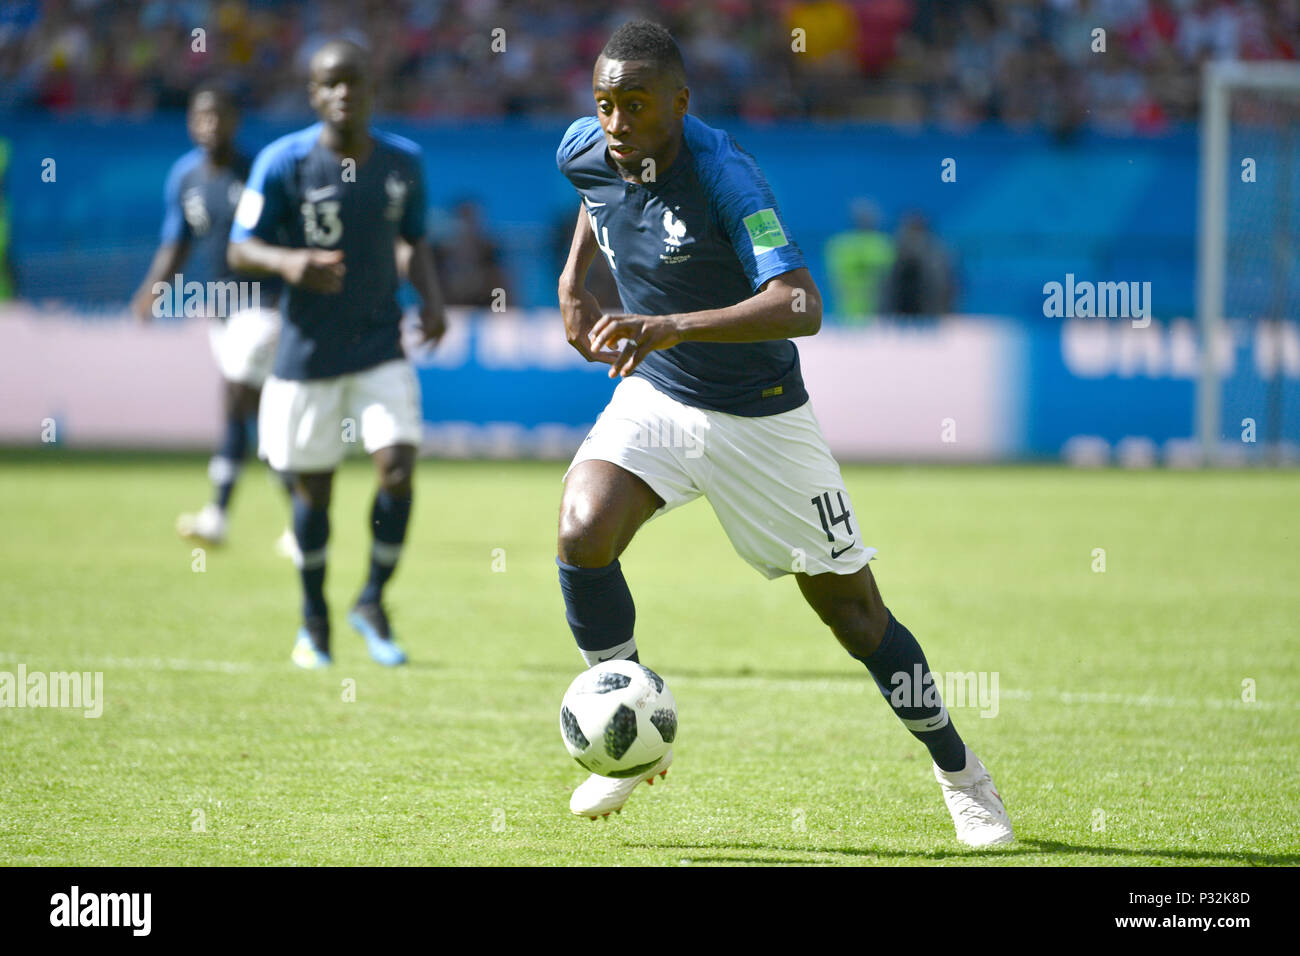 Kazan, Russia. 16th June, 2018. Blaise MATUIDI (FRA), Action, Single Action, Frame, Cut Out, Full Body, Whole Figure. France (FRA) -Australia (AUS) 2-1, Preliminary Round, Group C, Game 5, on 16.06.2018 in Kazan, Kazan Arena. Football World Cup 2018 in Russia from 14.06. - 15.07.2018. | usage worldwide Credit: dpa/Alamy Live News Stock Photo